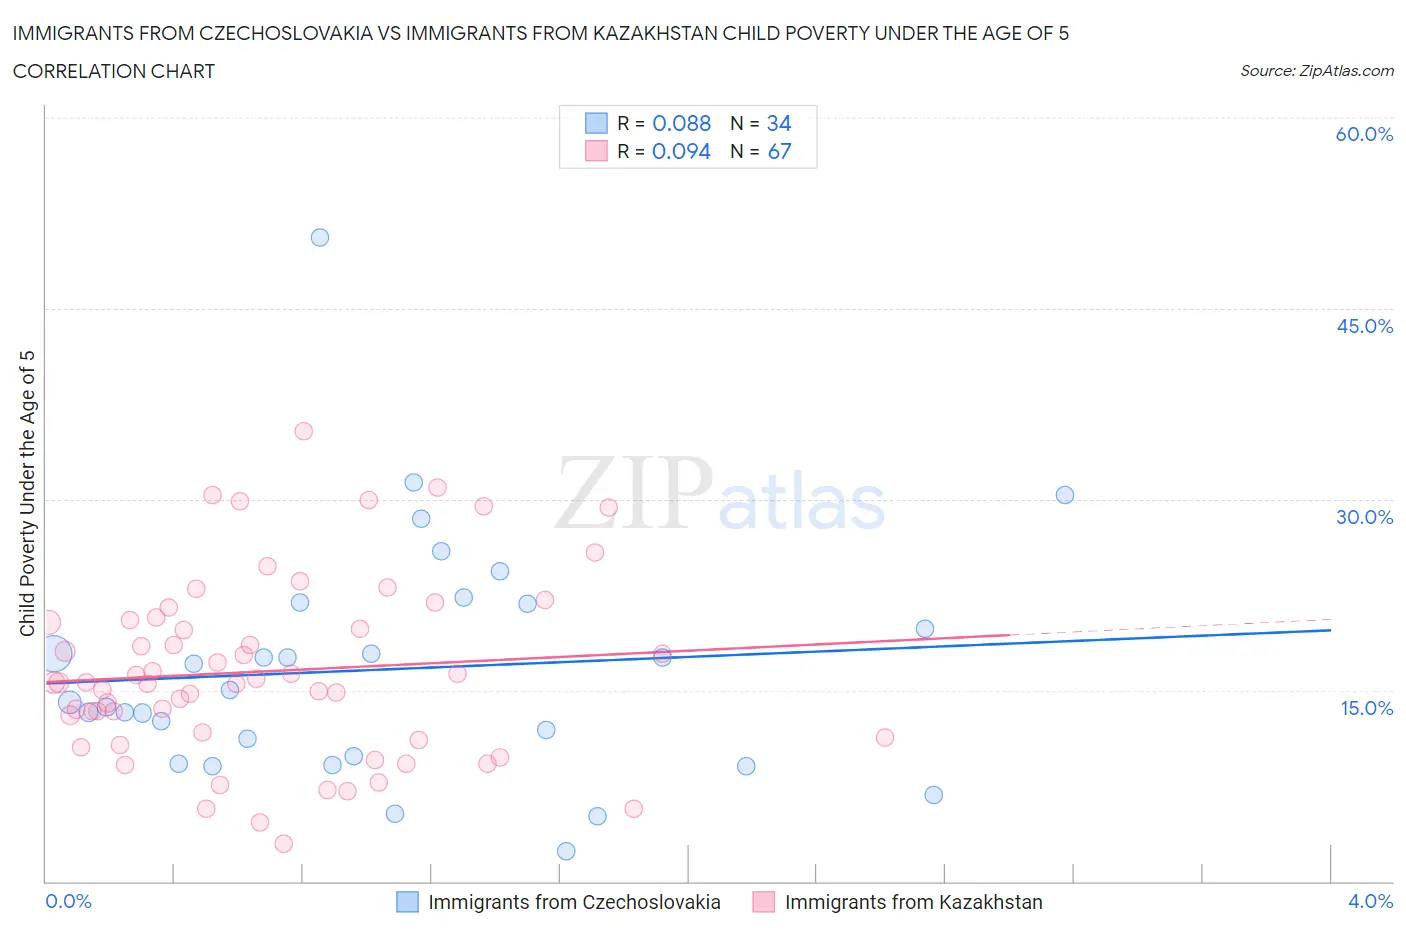 Immigrants from Czechoslovakia vs Immigrants from Kazakhstan Child Poverty Under the Age of 5